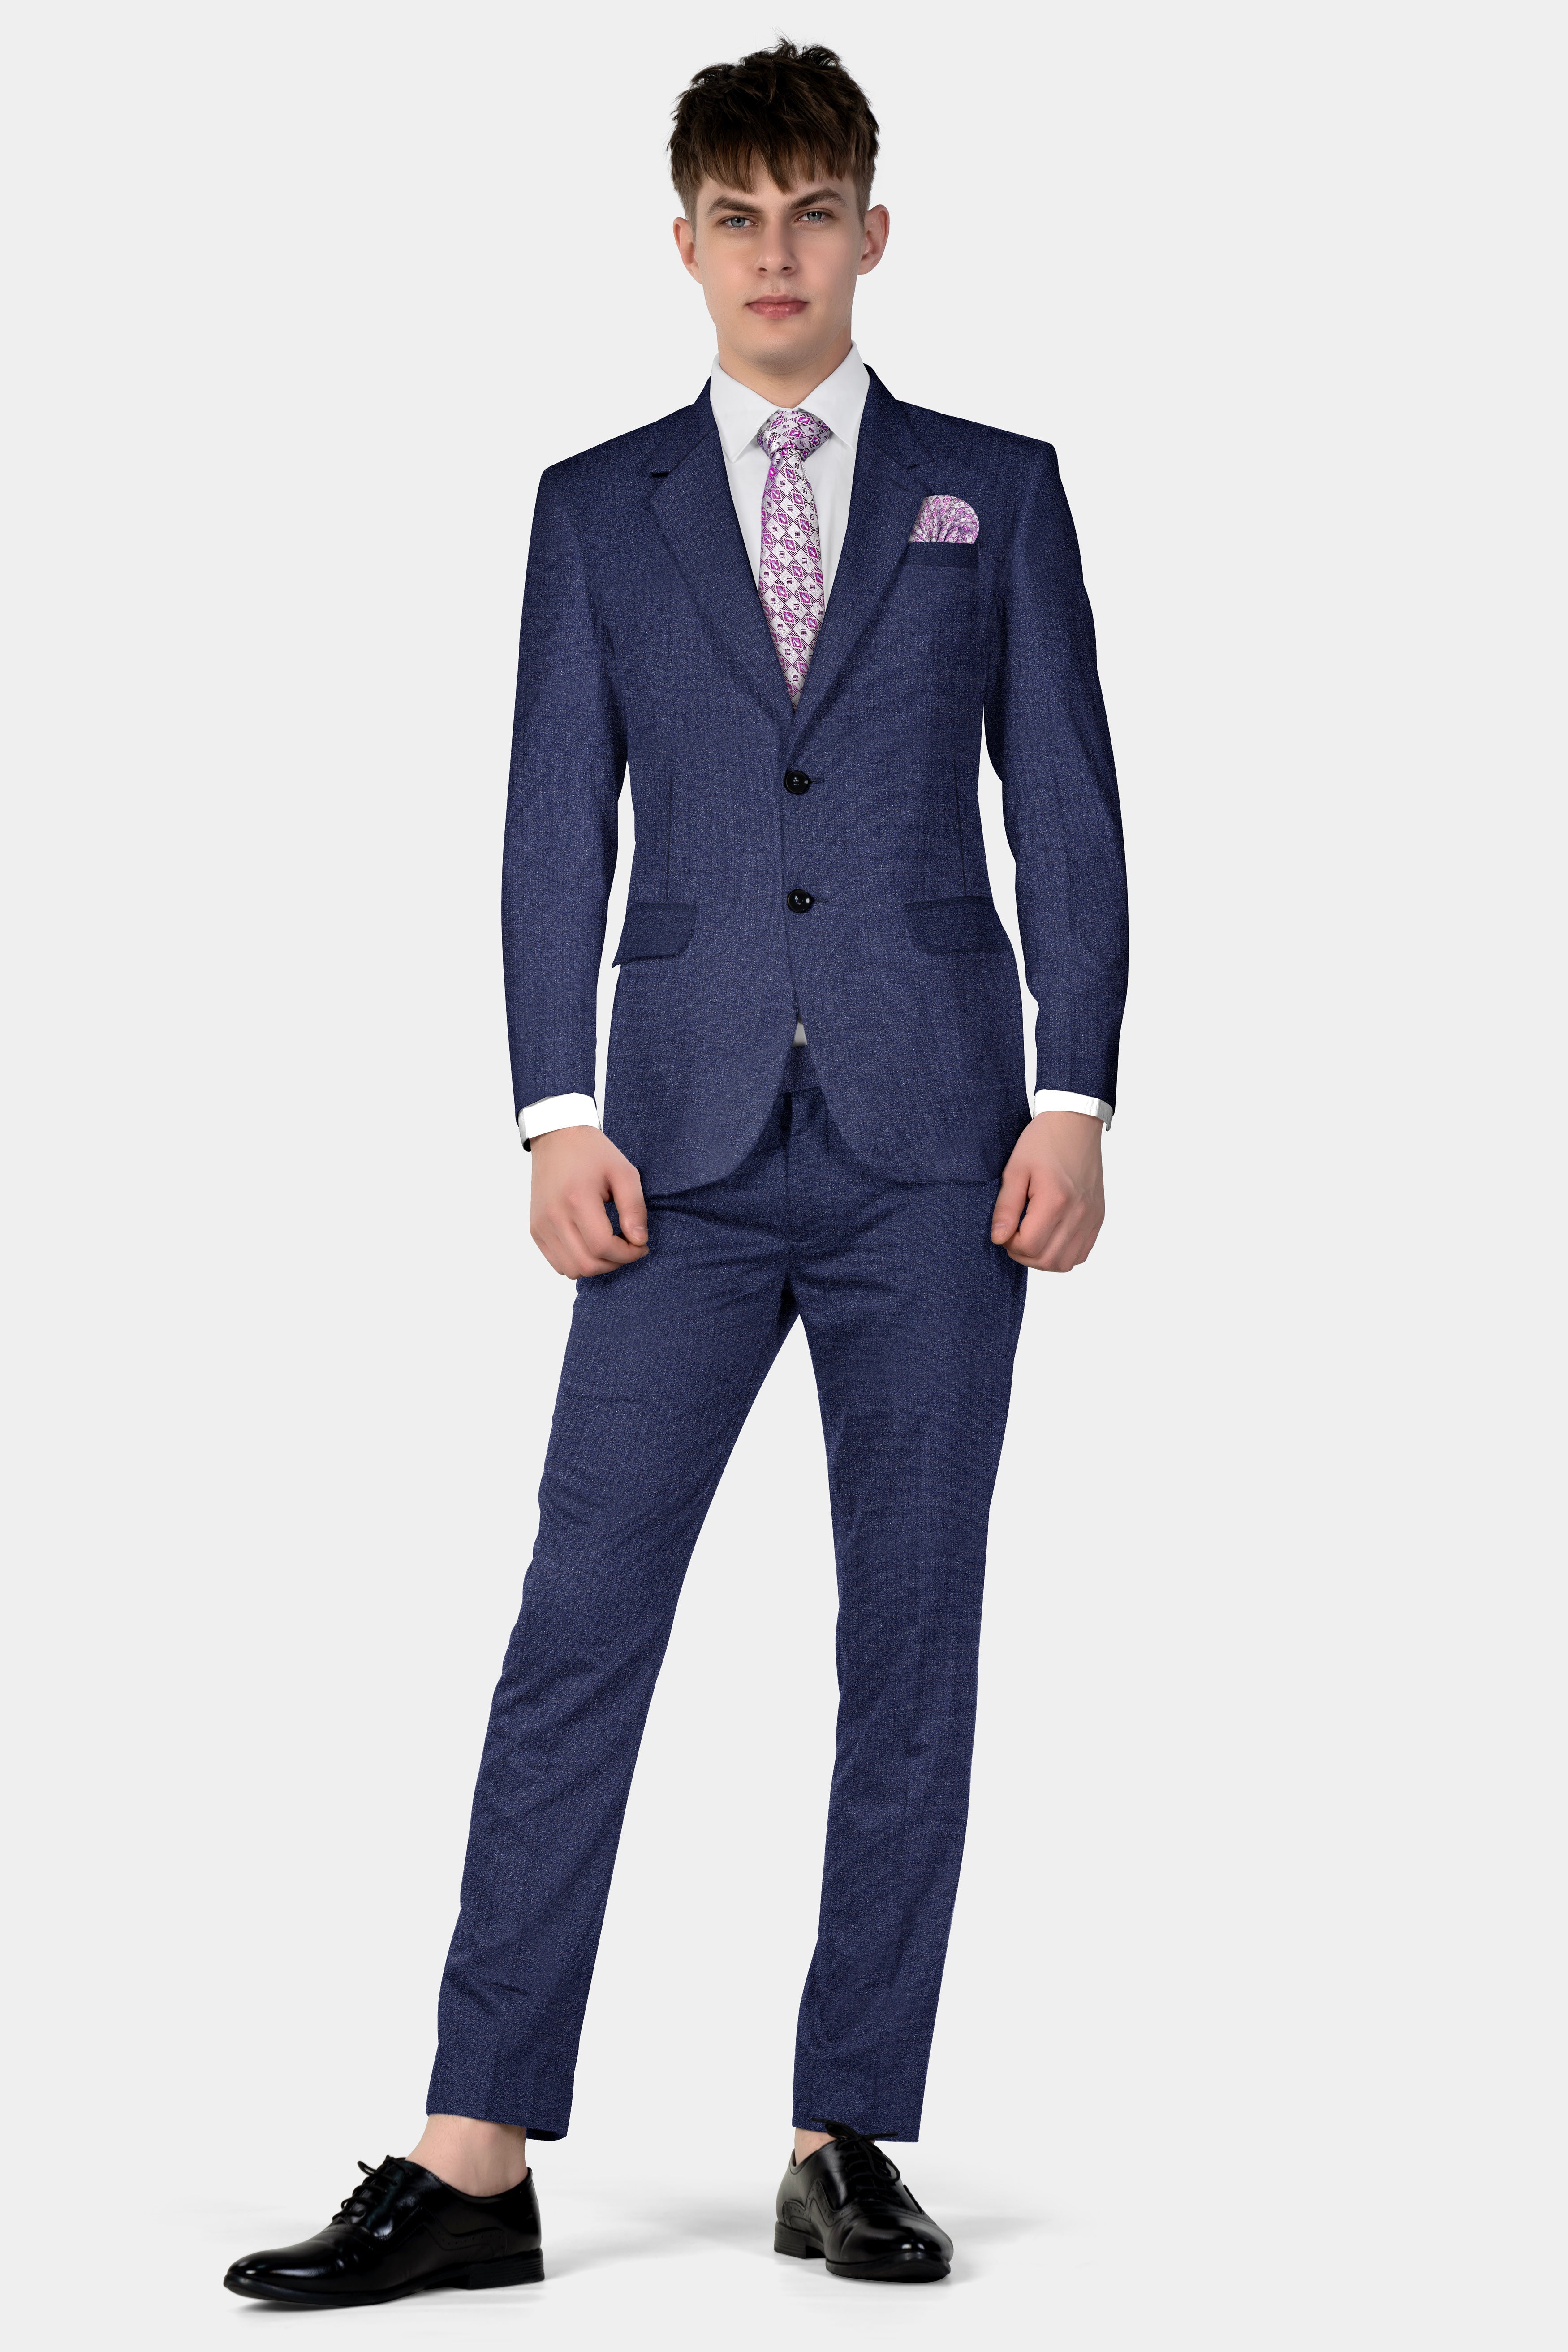 Ebony Clay Blue Textured Wool Blend Single Breasted Suit